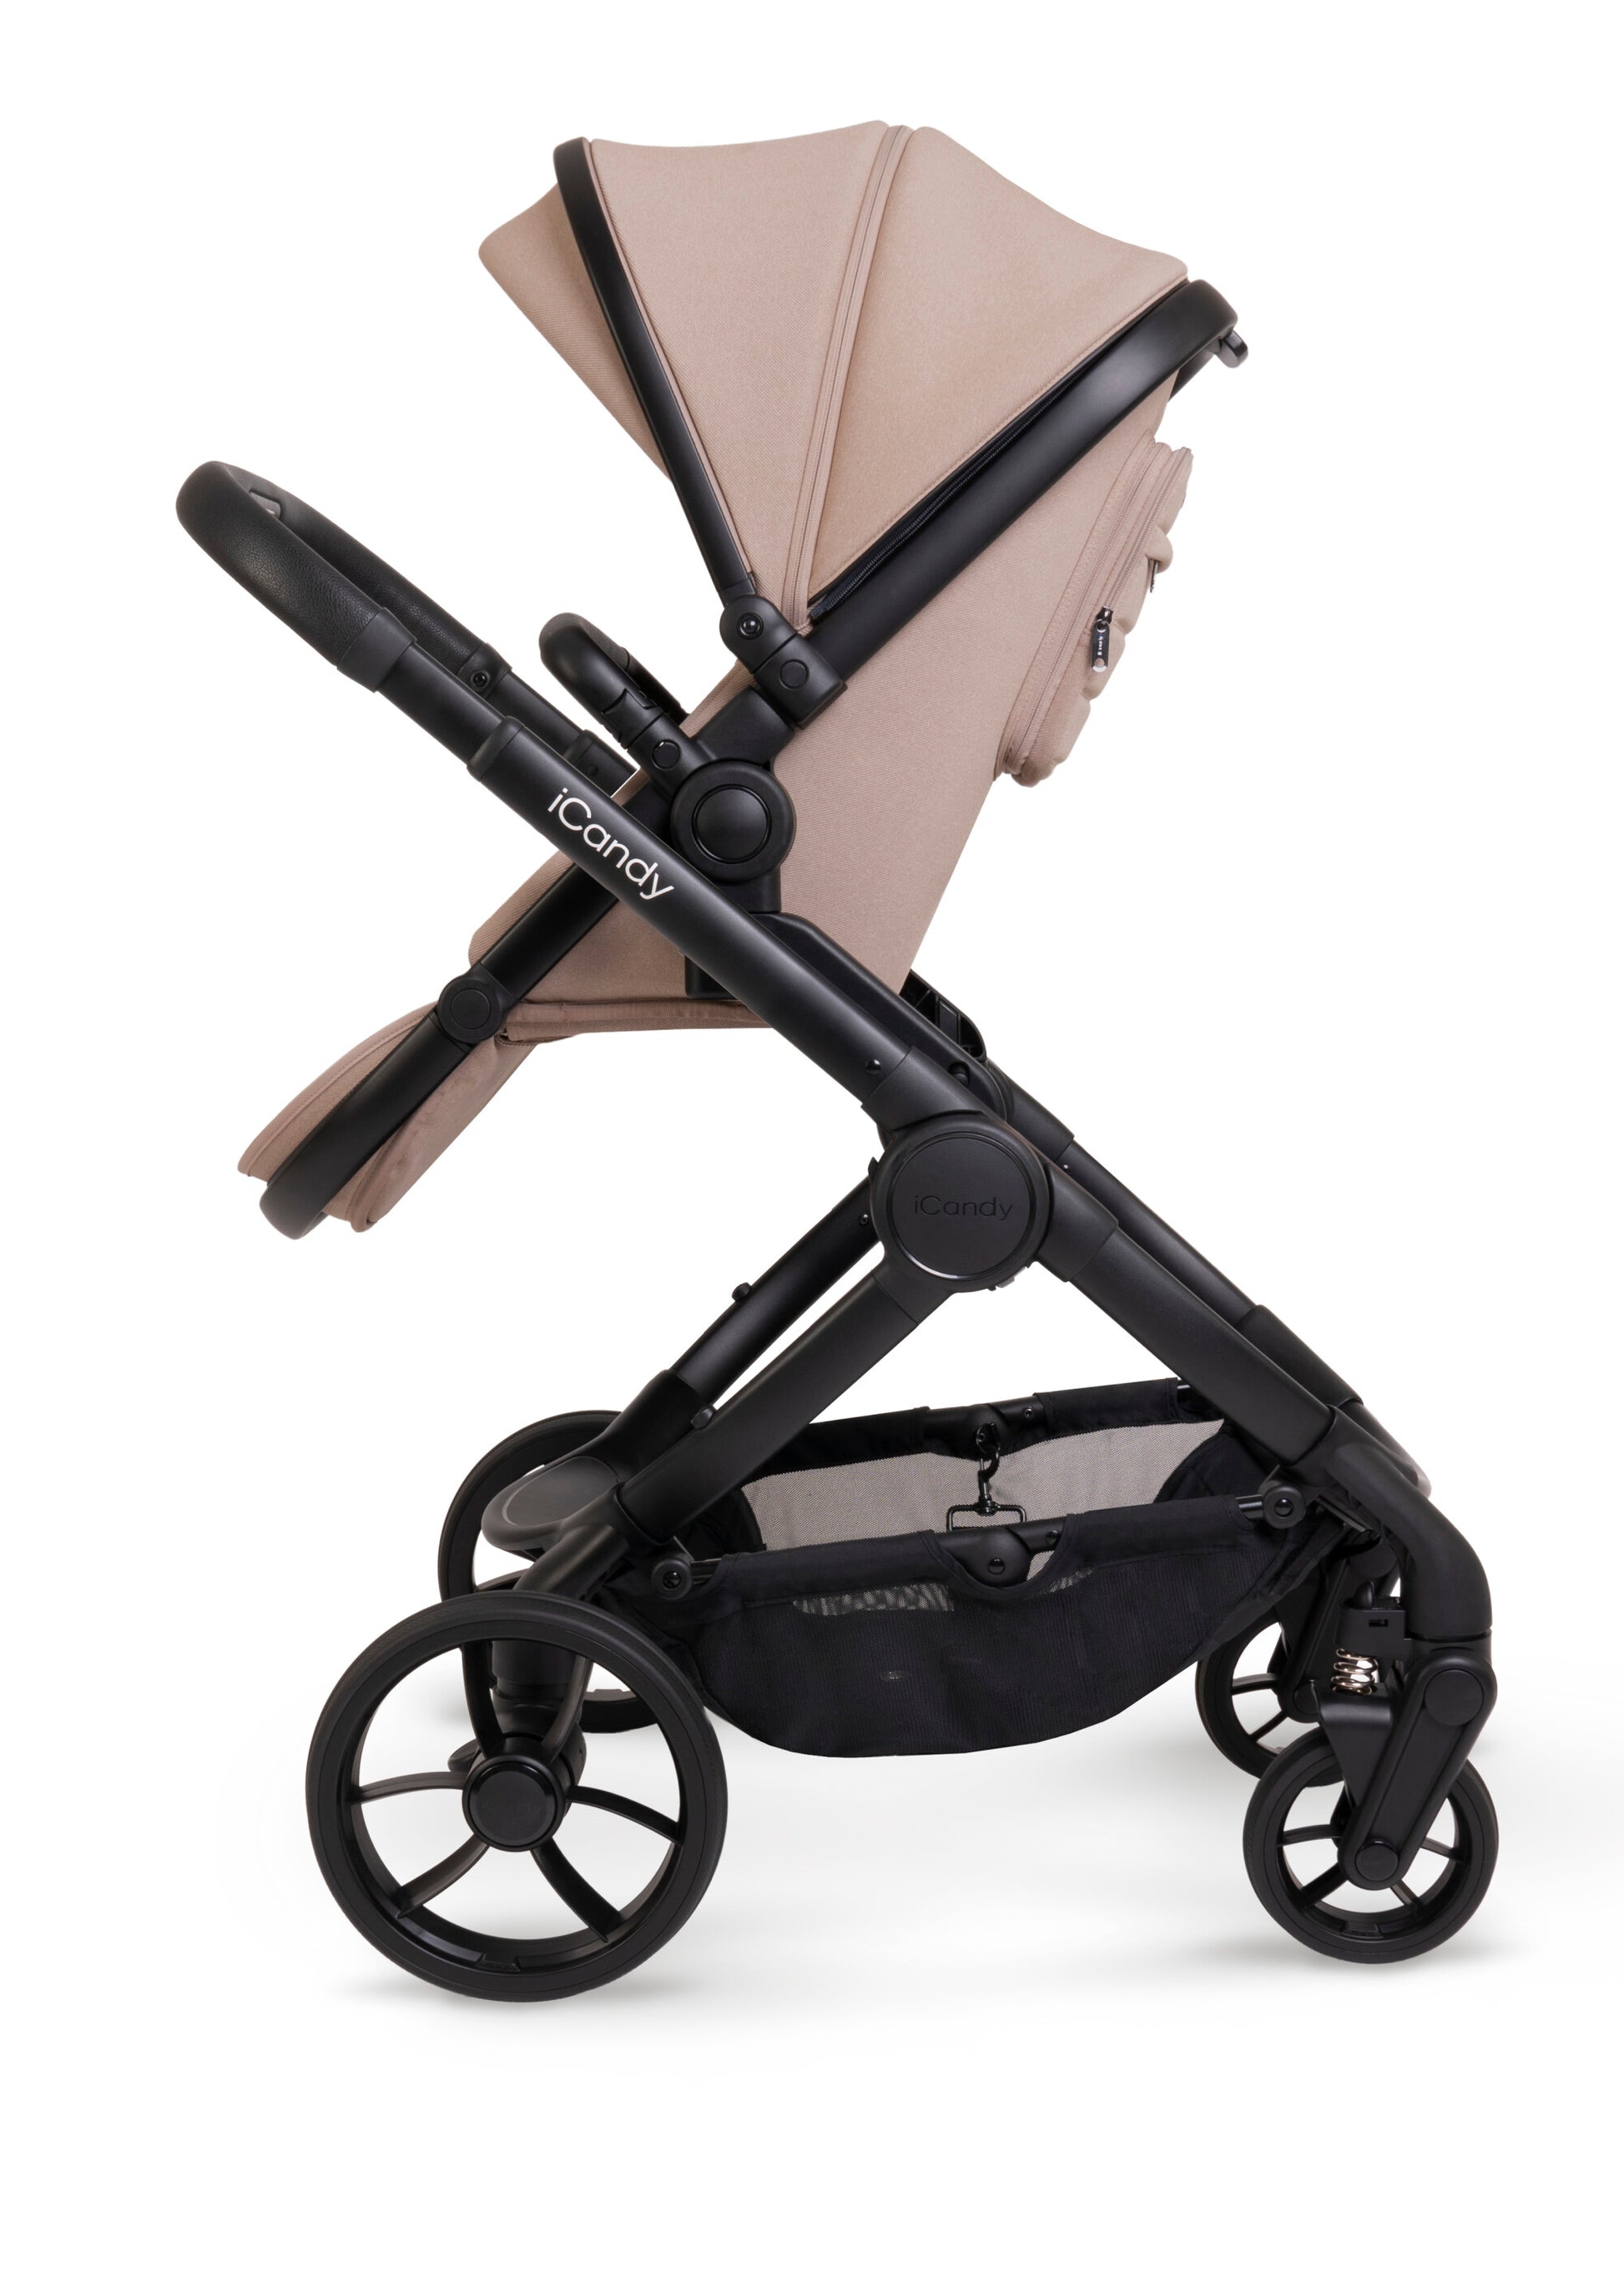 iCandy Peach 7 Pushchair & Maxi Cosi Cabriofix Travel System | Cookie on Black